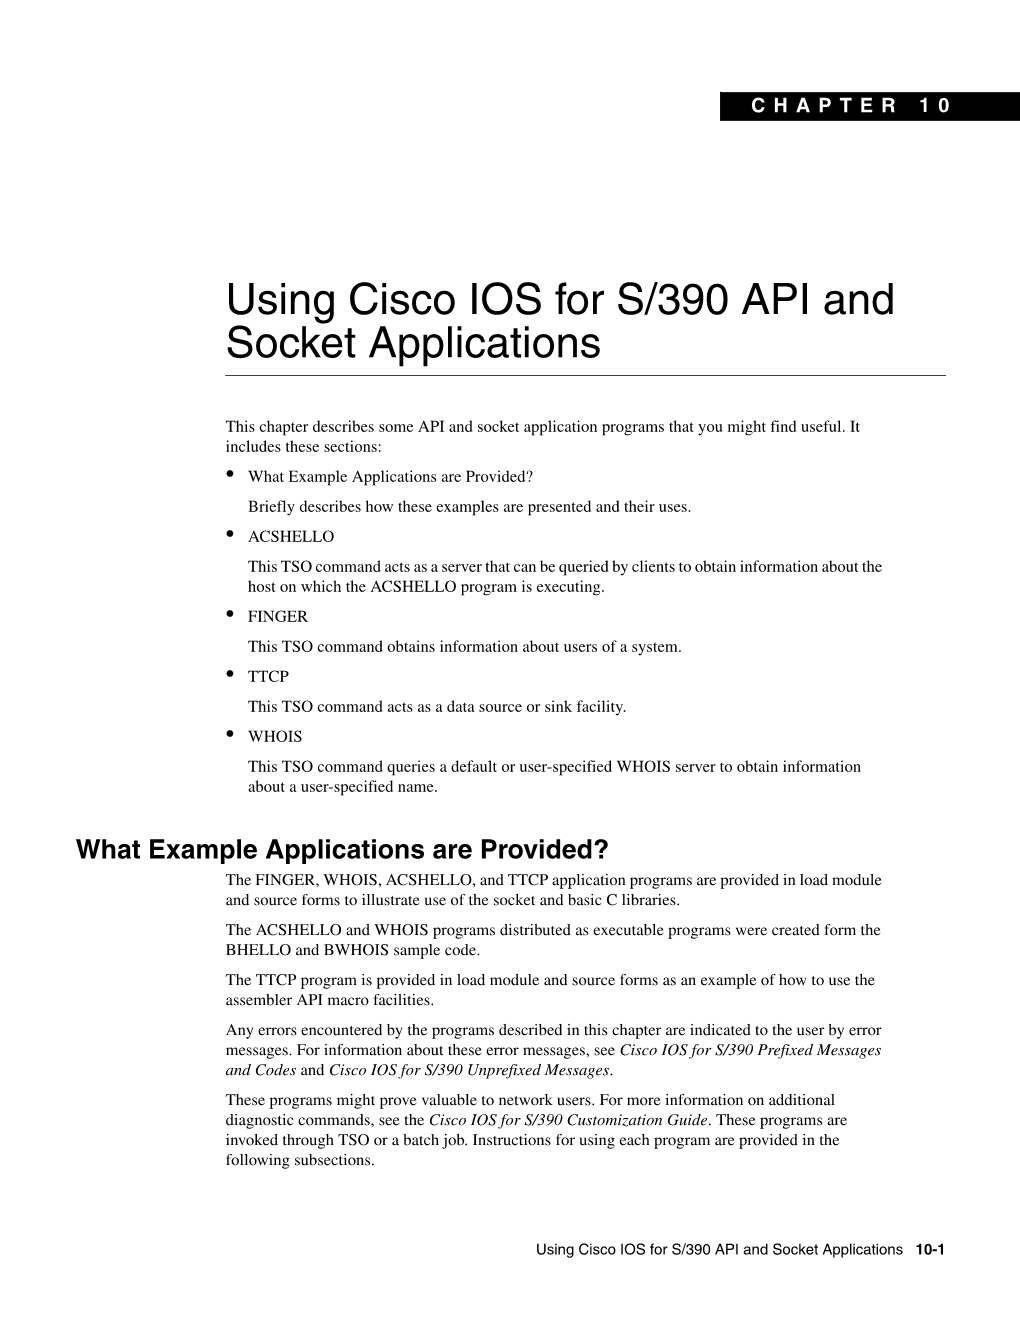 Using Cisco IOS for S/390 API and Socket Applications